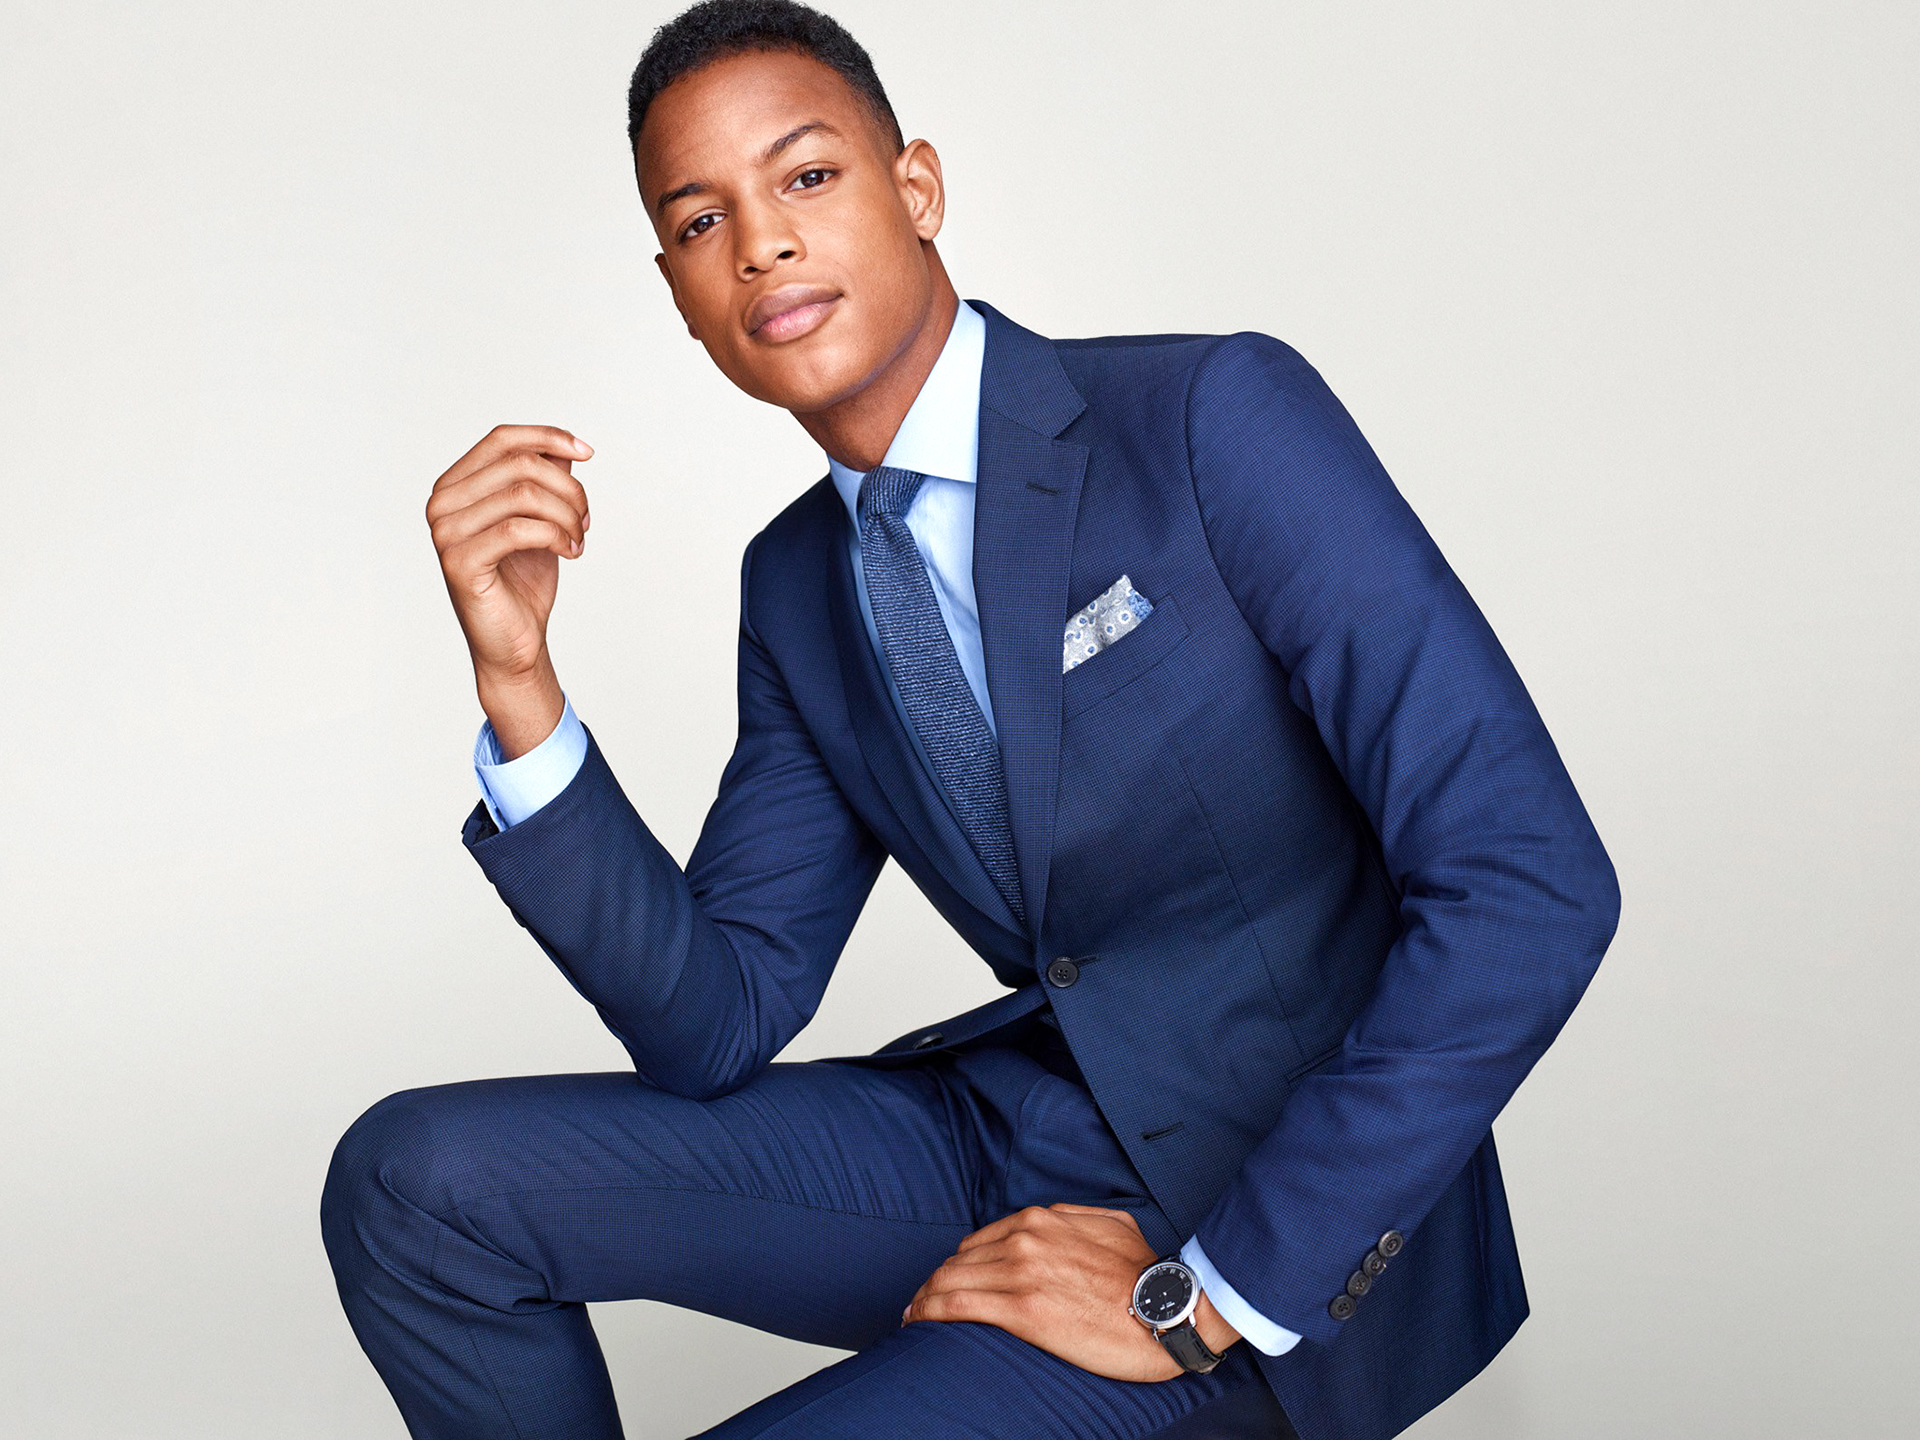 The suit is a crucial part of the cocktail attire dress code for men